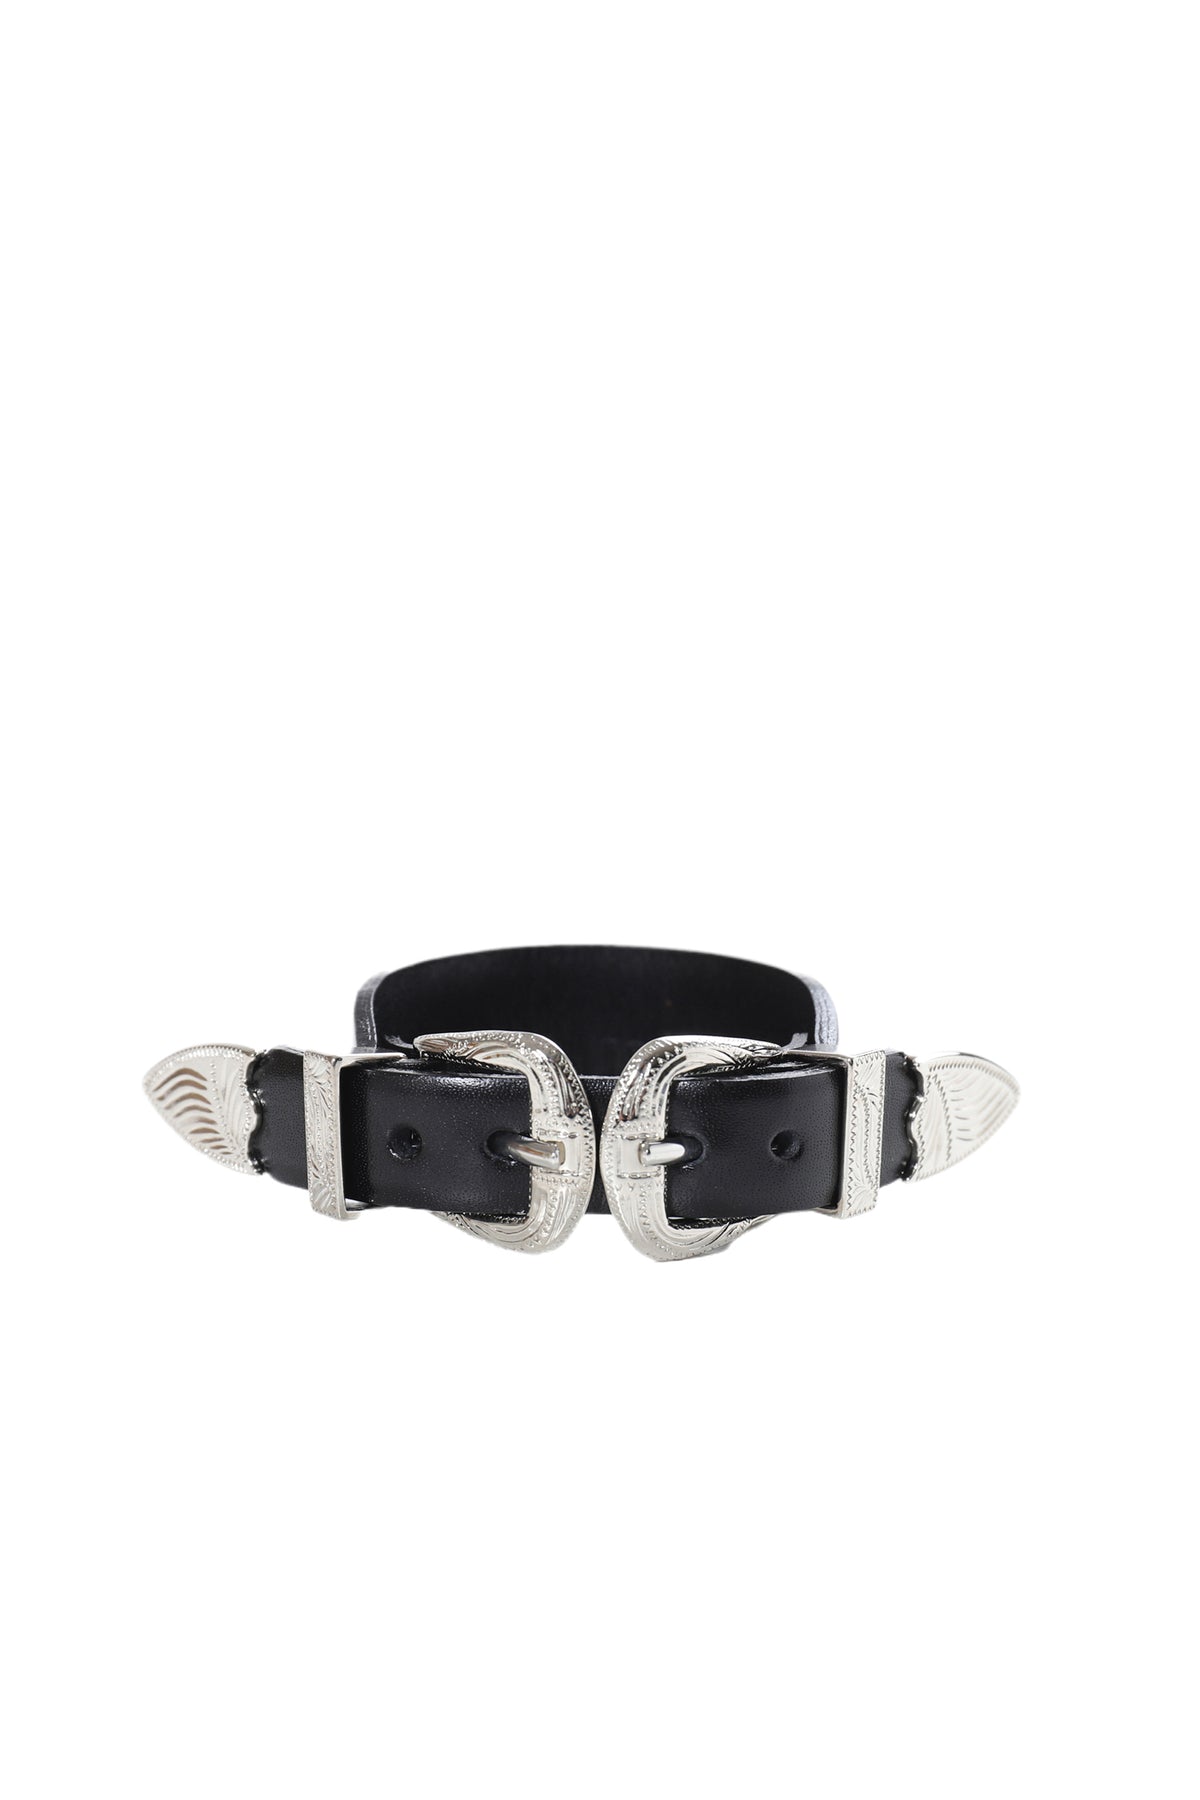 TOGA PULLA トーガ プルラ SS24 DOUBLE BUCKLE BANGLE / BLK - NUBIAN